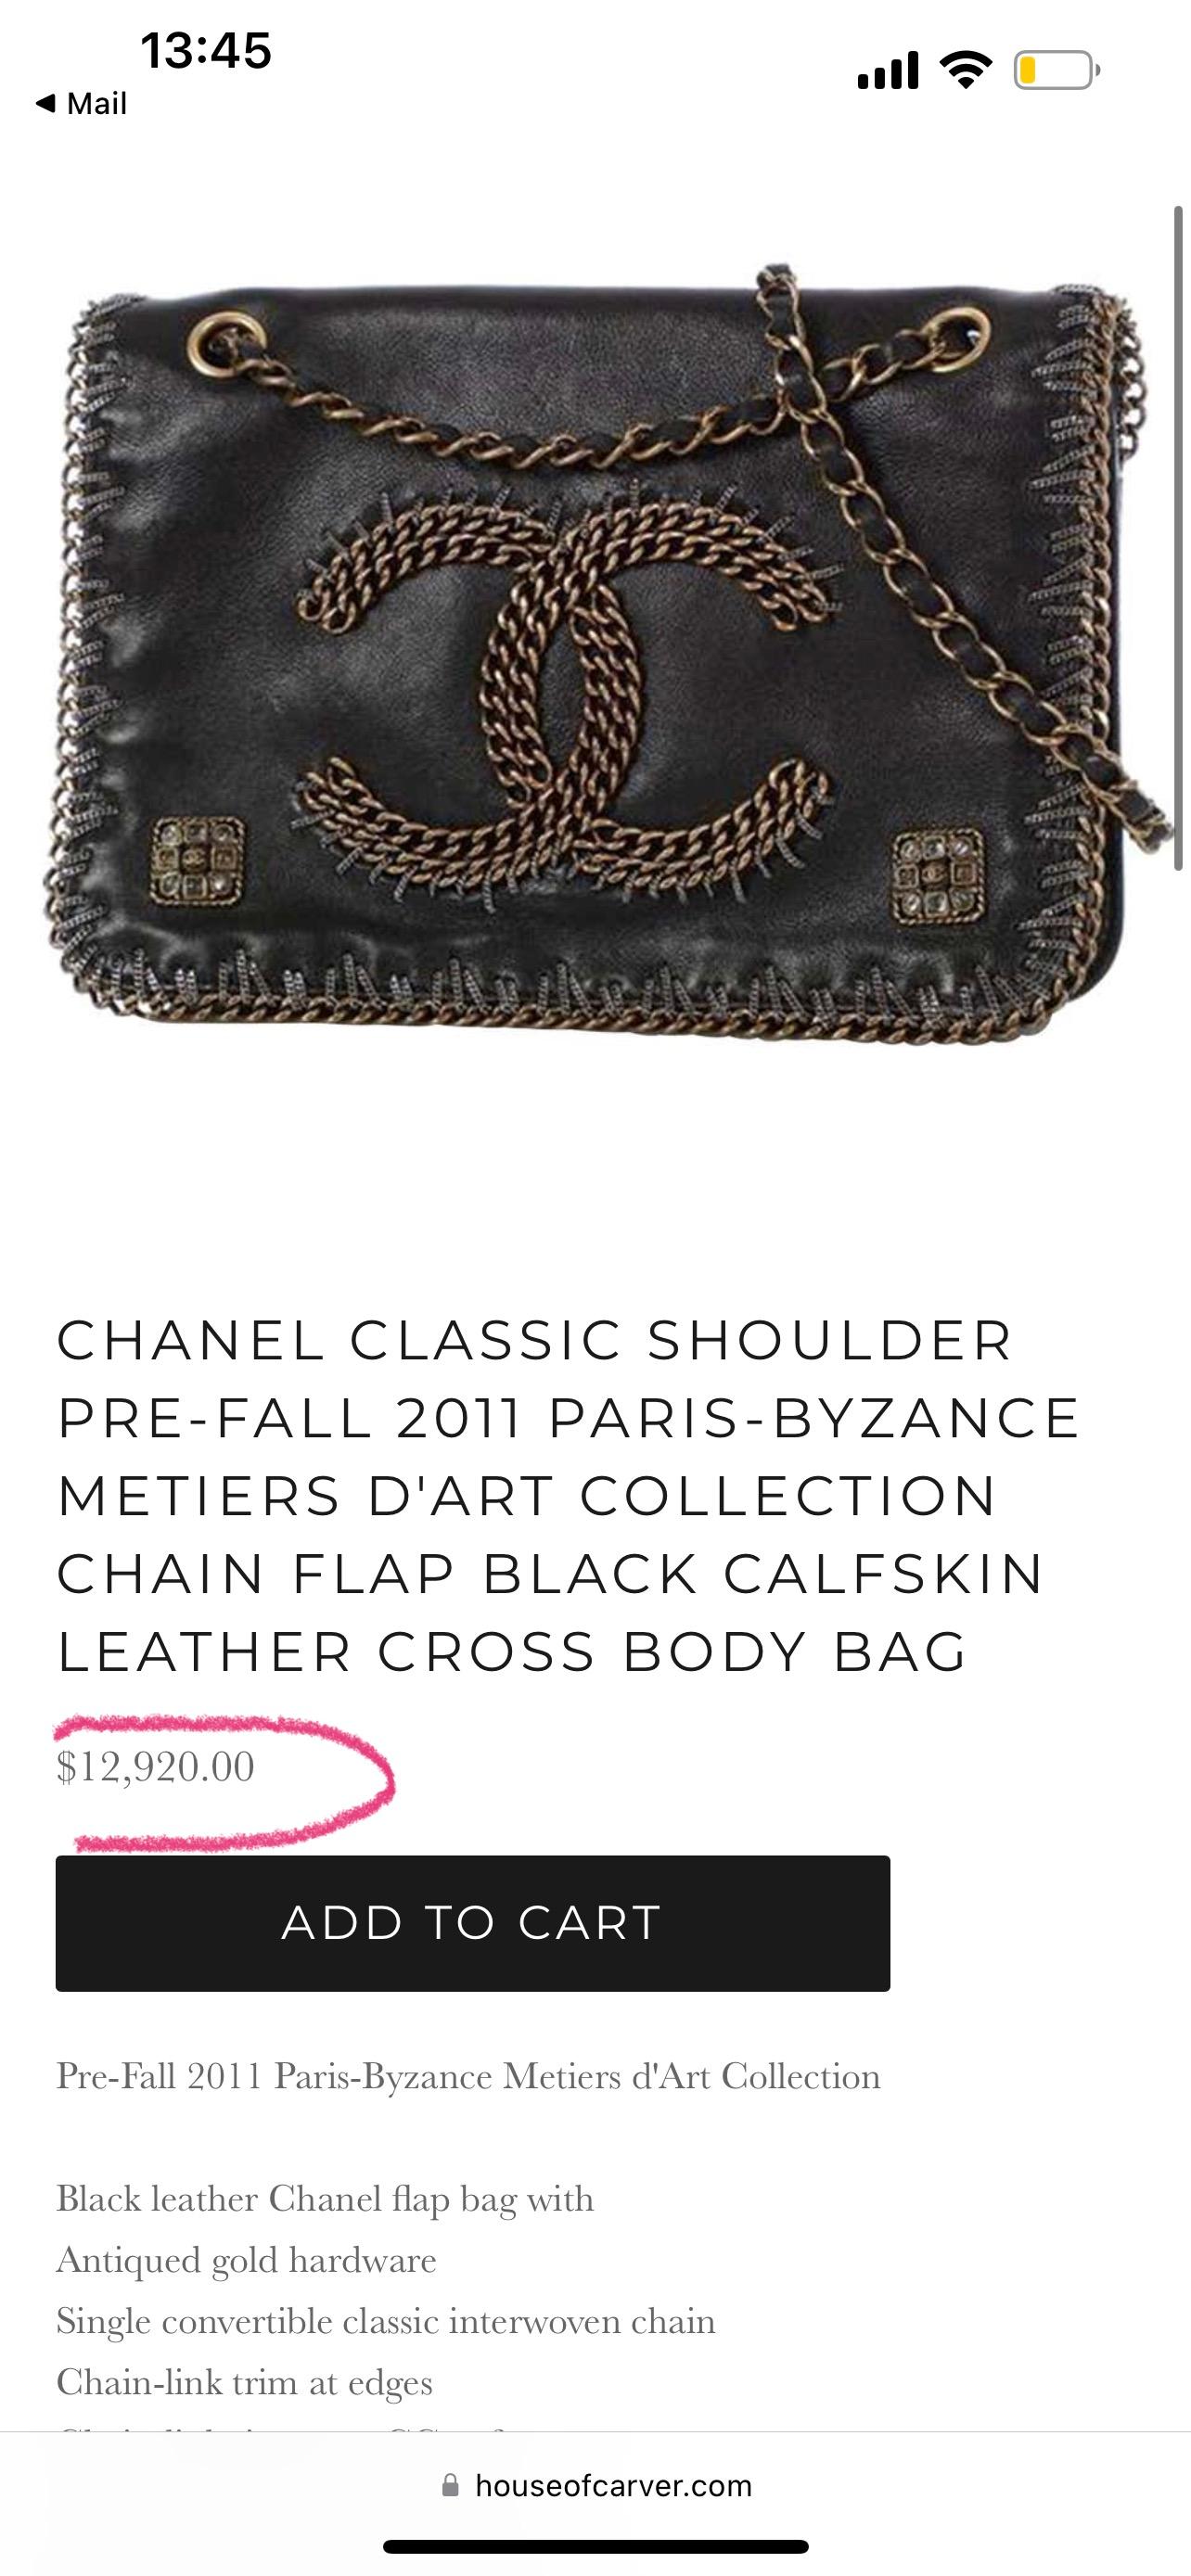 Extremely rare, collectors Chanel black leather flap bag with chain embellishment from Paris / BYZANCE Collection by Karl Lagerfeld 
Price on other sources starts from 12,000$ 
Super beautiful in person! Condition is pristine, only tried once,